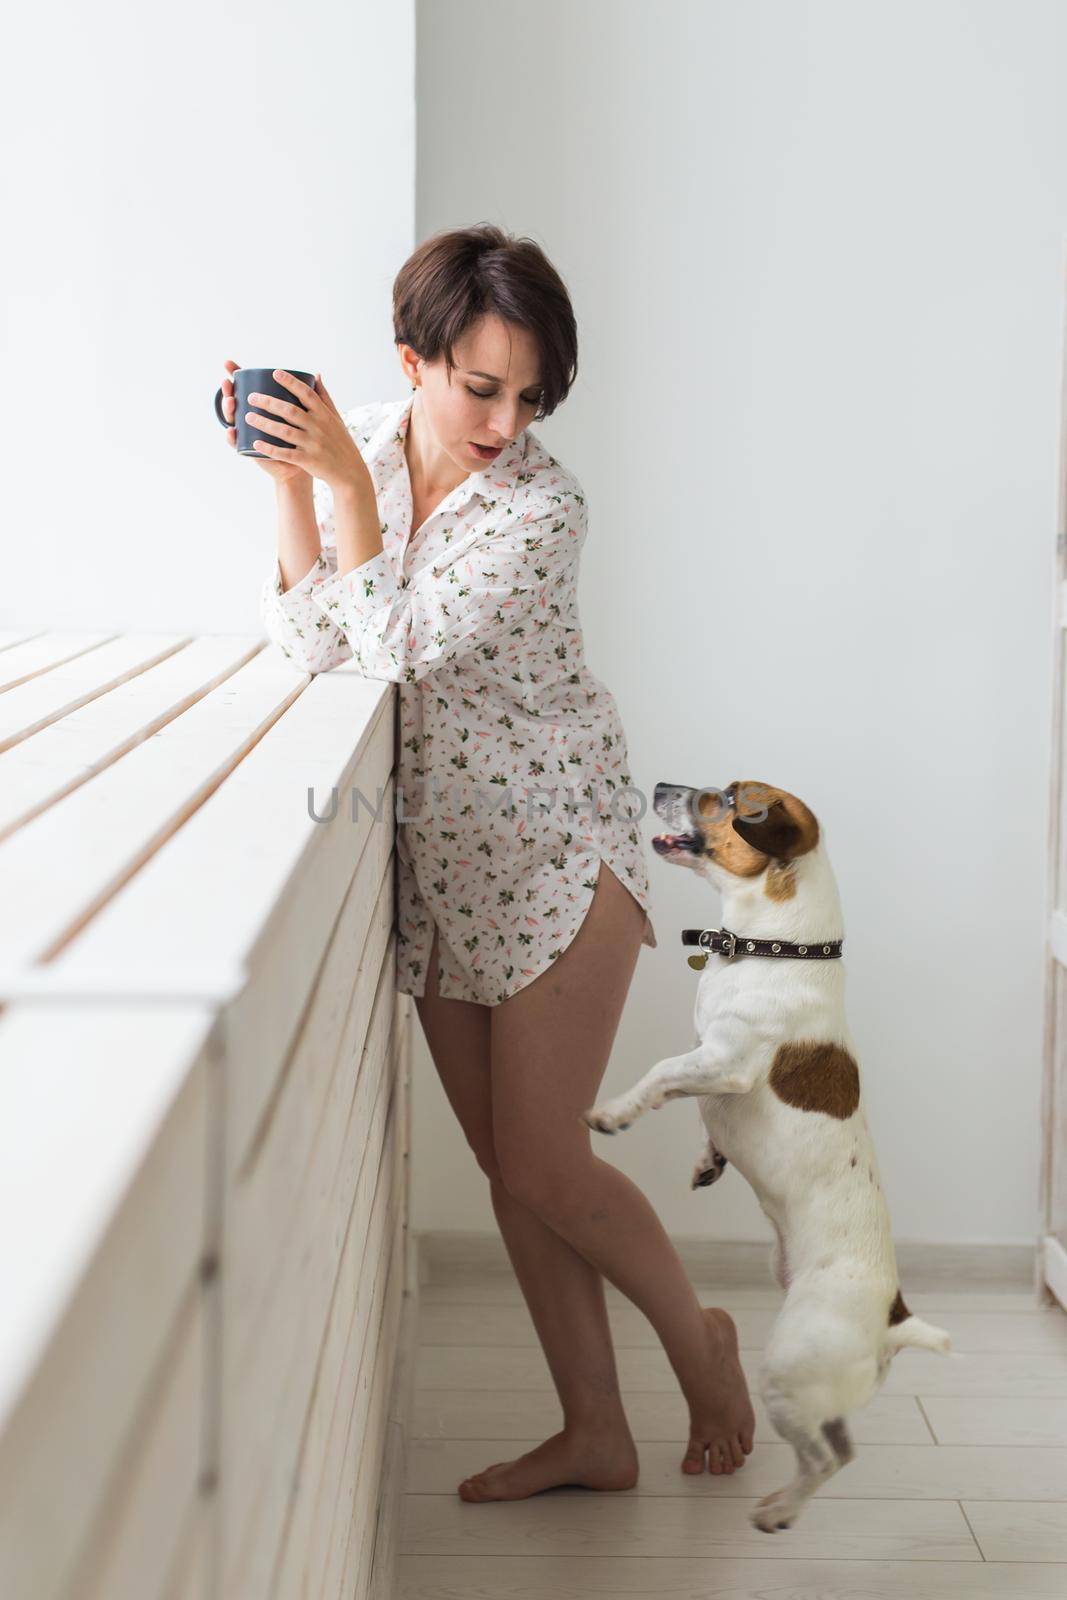 Woman wearing cozy home shirt relaxing at home and playing with dog jack Russell terrier, drinking tea. Morning concept. by Satura86